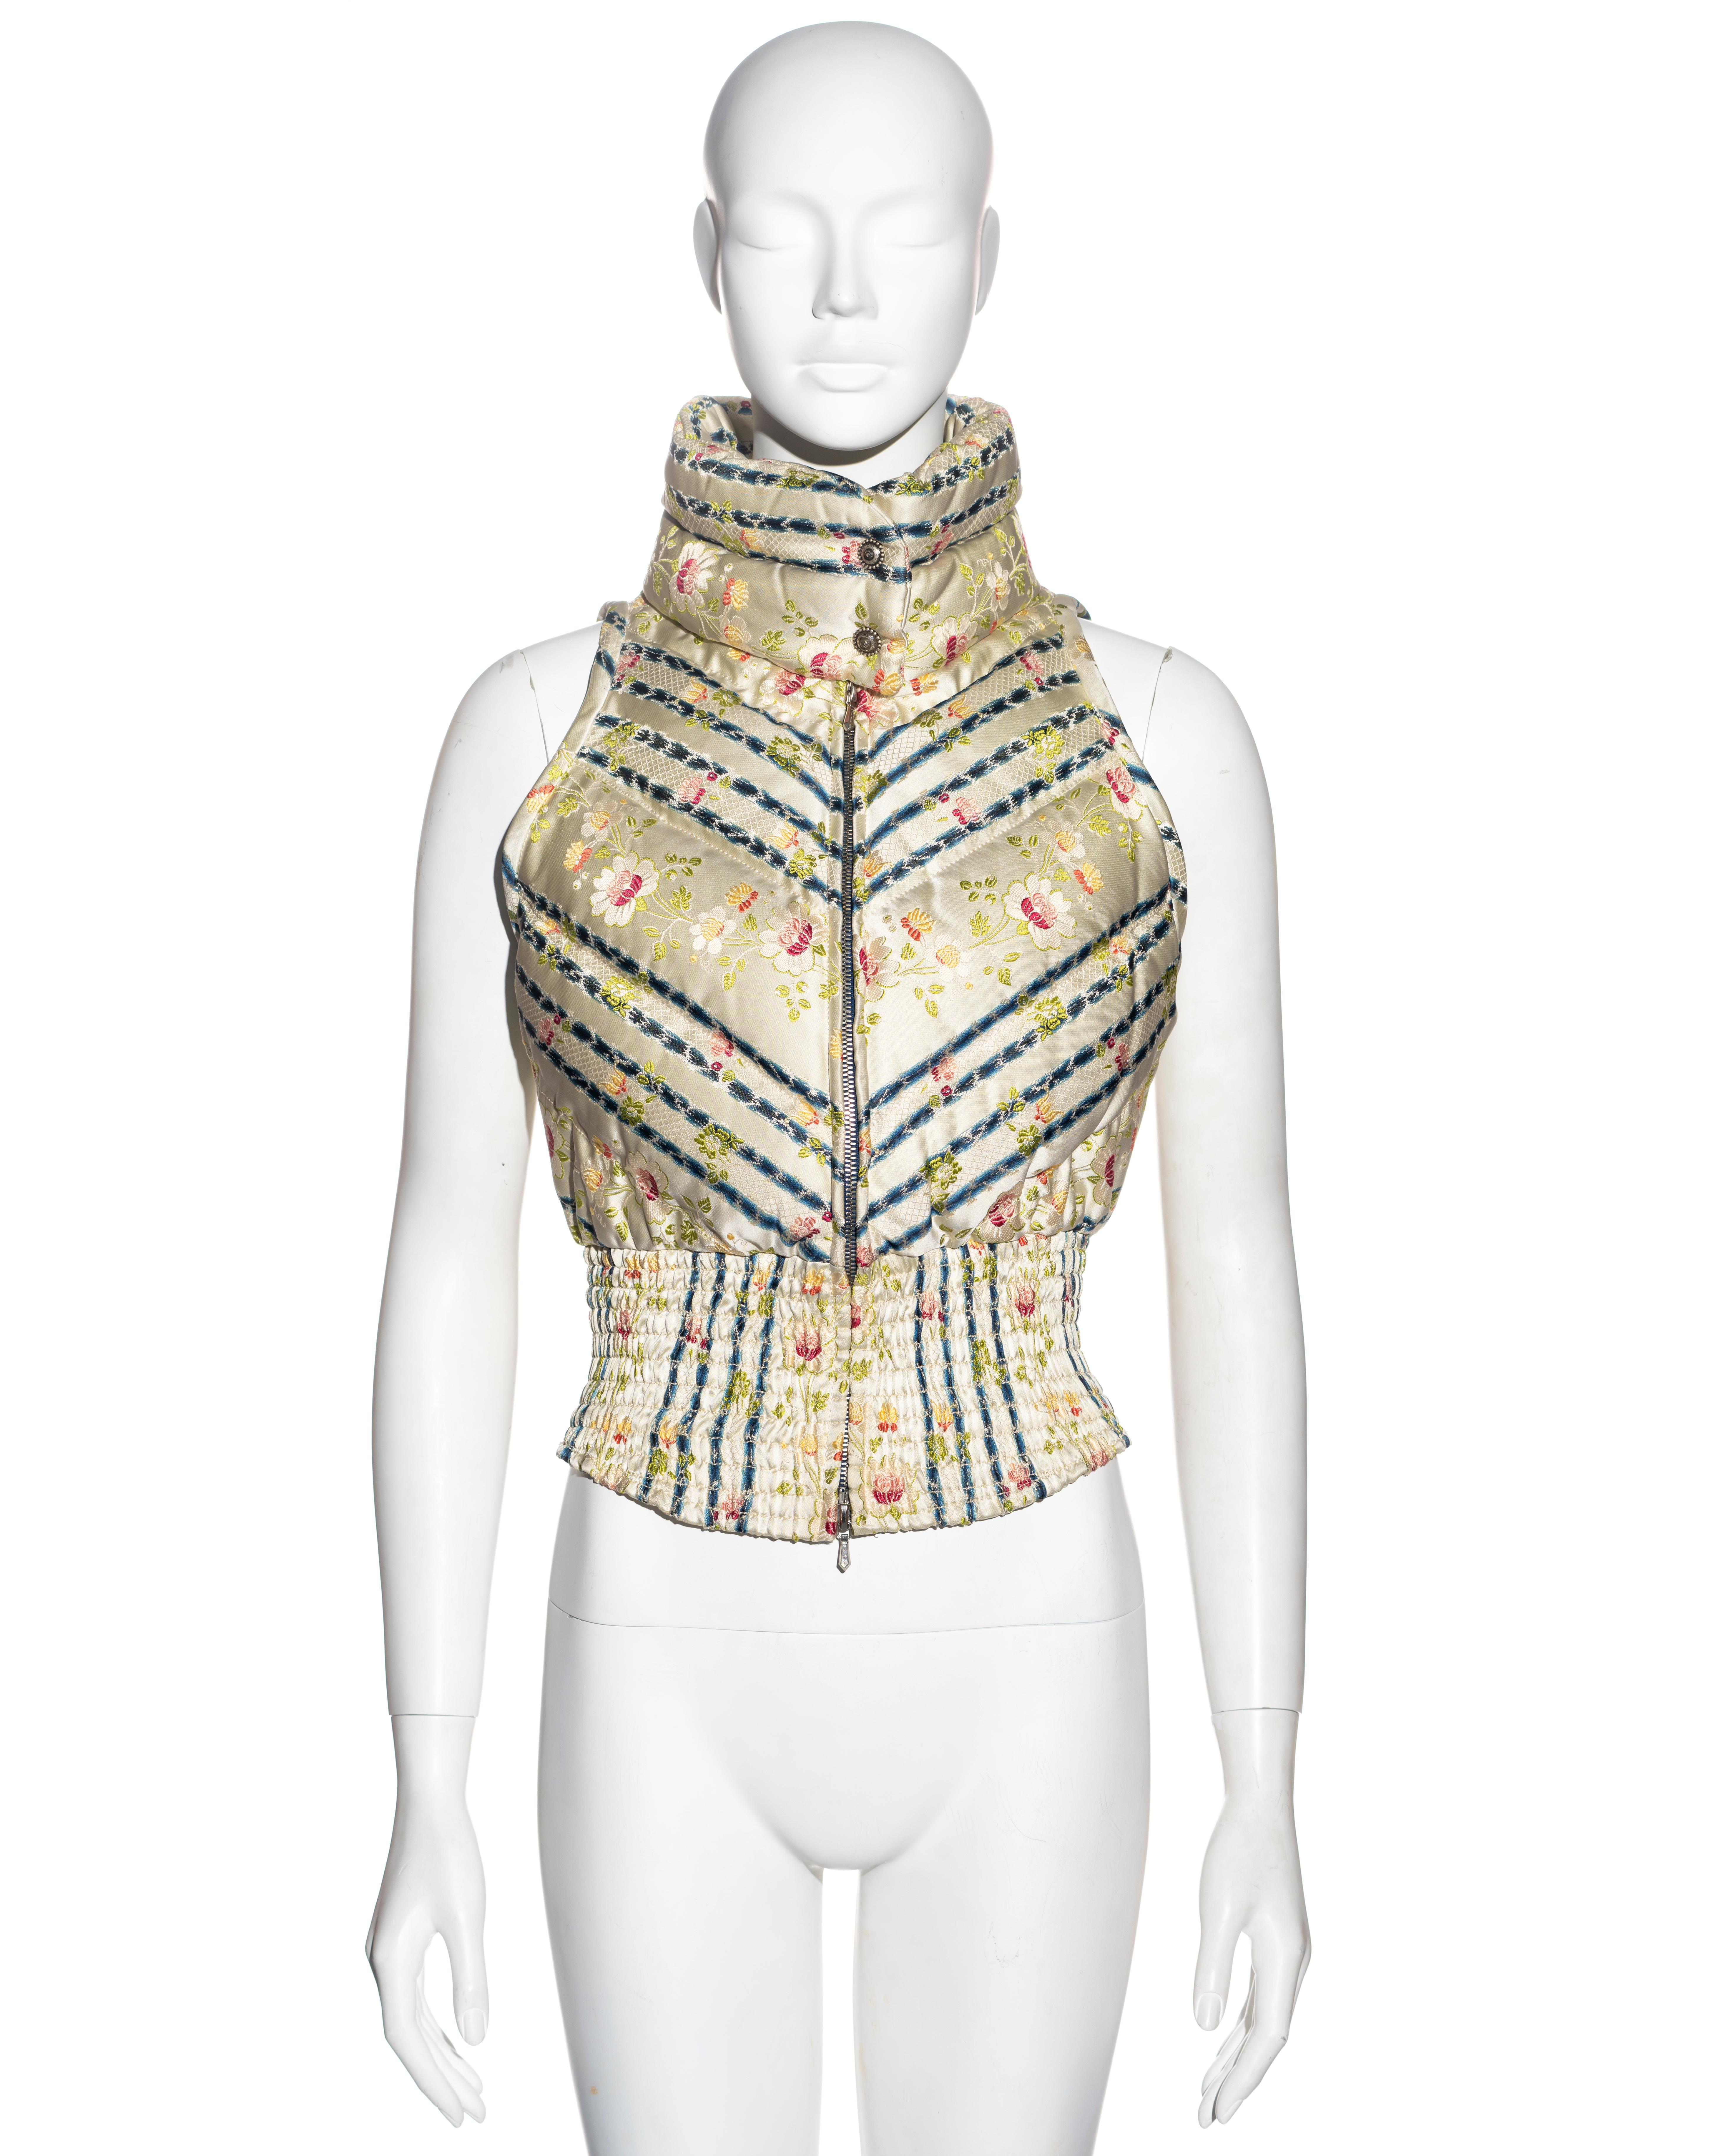 ▪ Christian Dior down vest
▪ Designed by John Galliano
▪ Sold by One of a Kind Archive
▪ Constructed from silk brocade with floral and striped pattern 
▪ Wide smocked waistband 
▪ Silk lining 
▪ Double-ended front zipper 
▪ High neck
▪ Size: FR 38 -